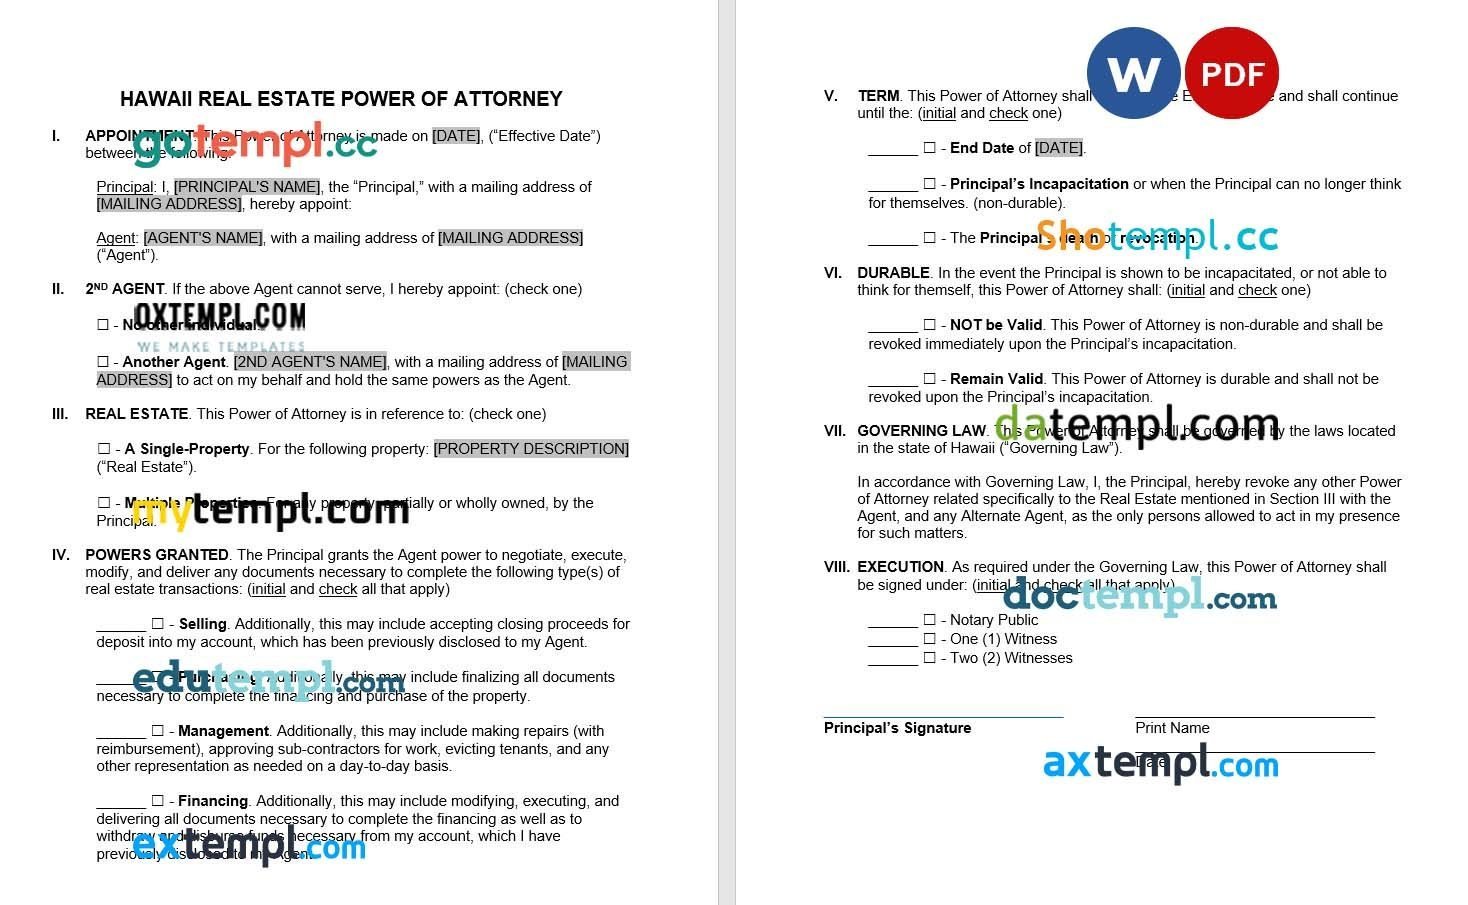 Hawaii Real Estate Power of Attorney Form example, fully editable